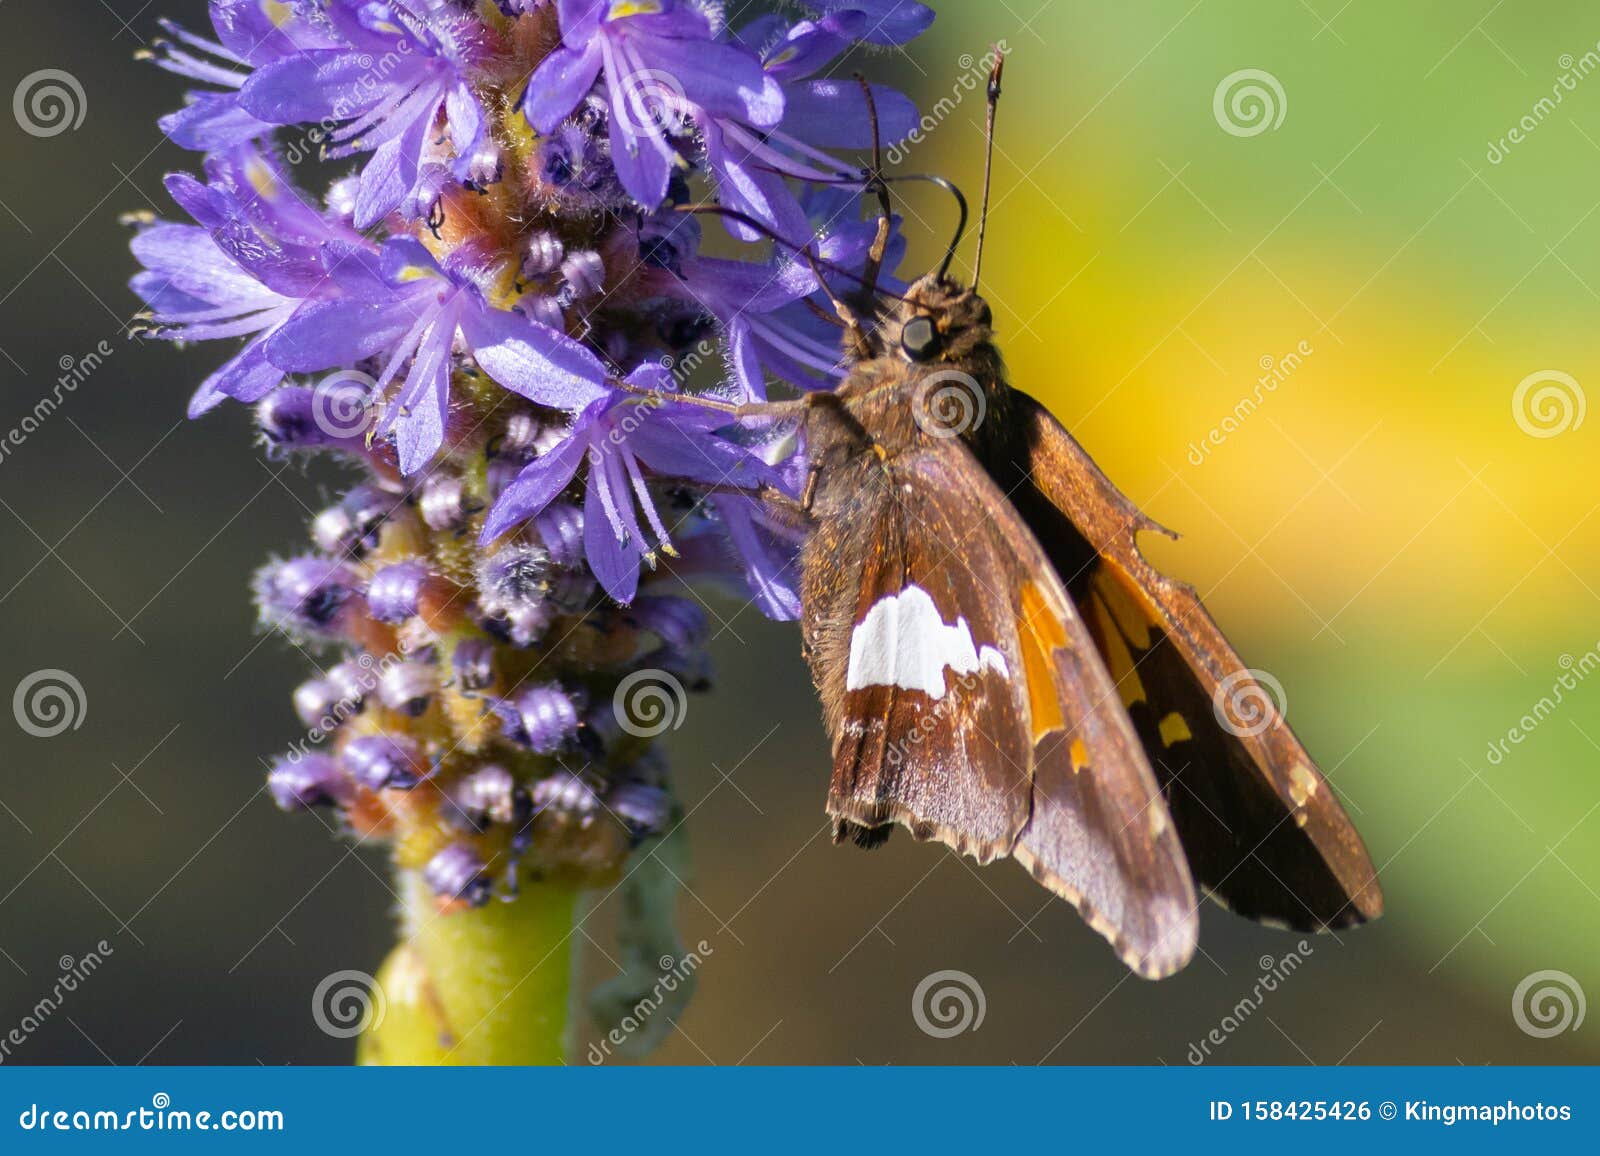 hesperia leonardus, the leonard`s skipper butterfly perches on a purple flower close up in pinery provincial park, ontario, canad